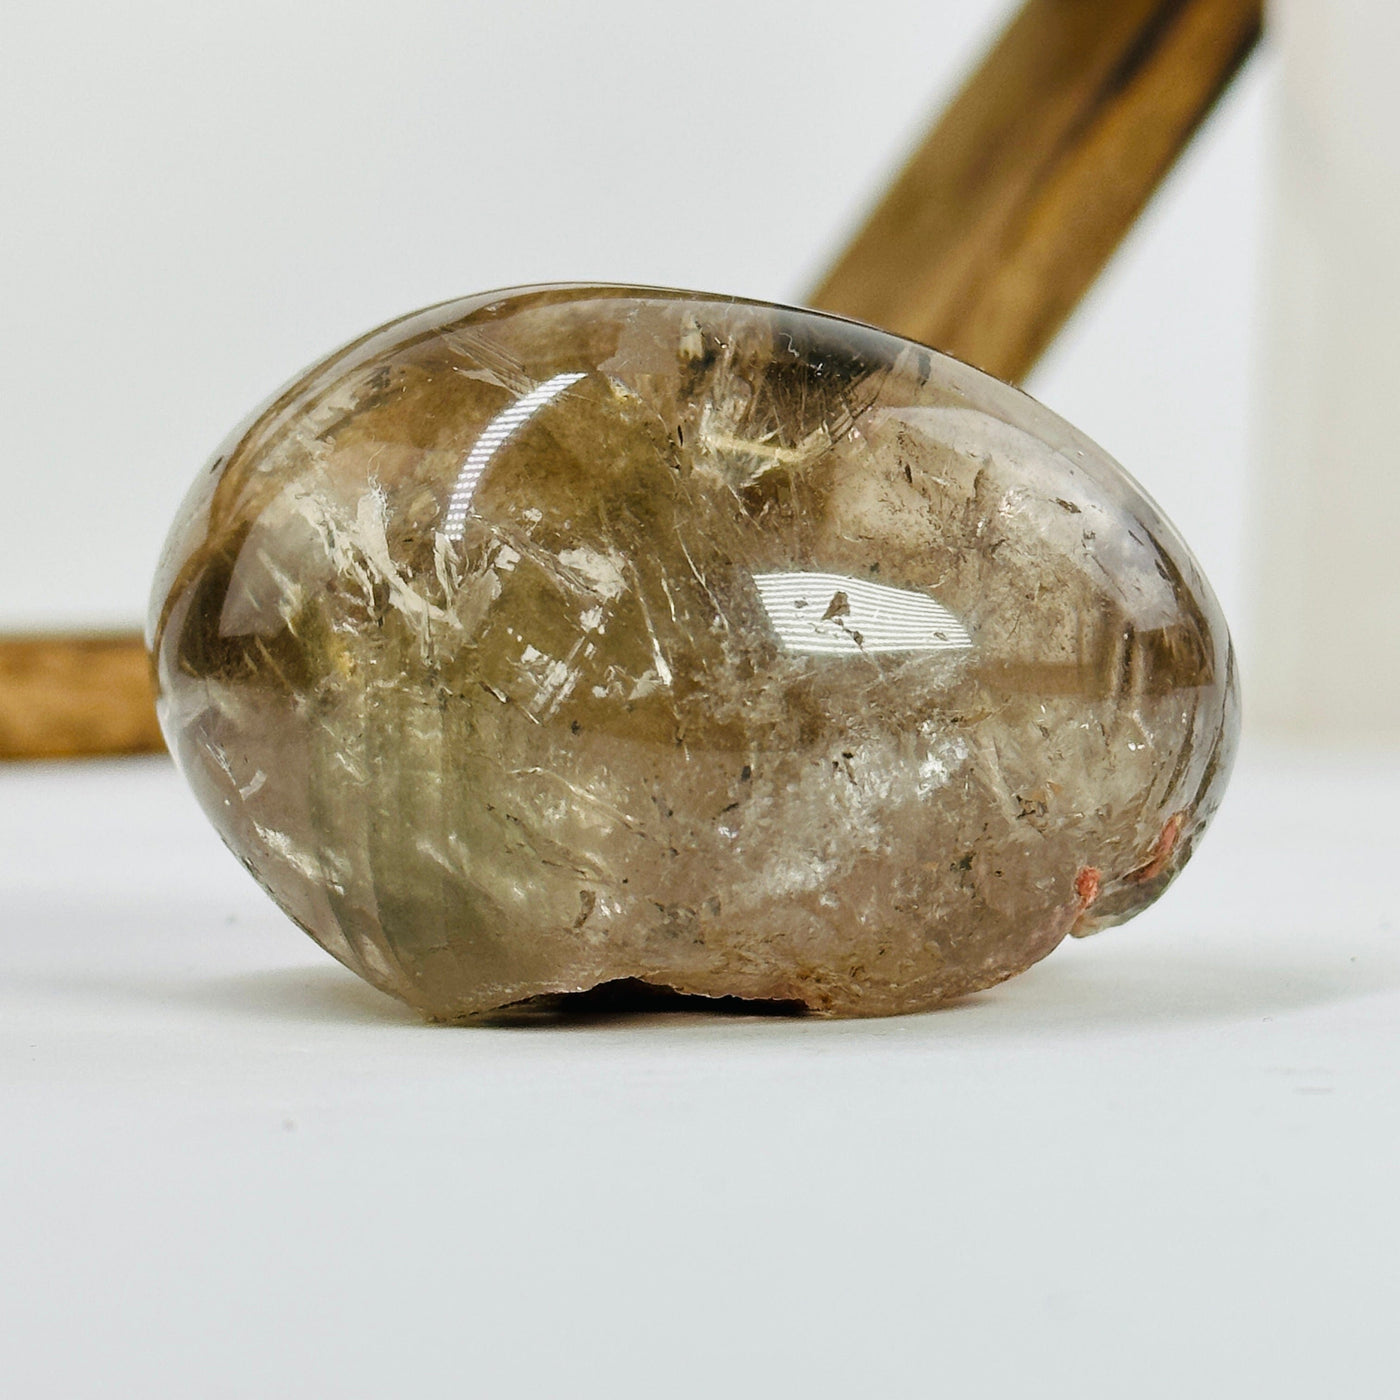 polished smoky quartz with decorations in the background